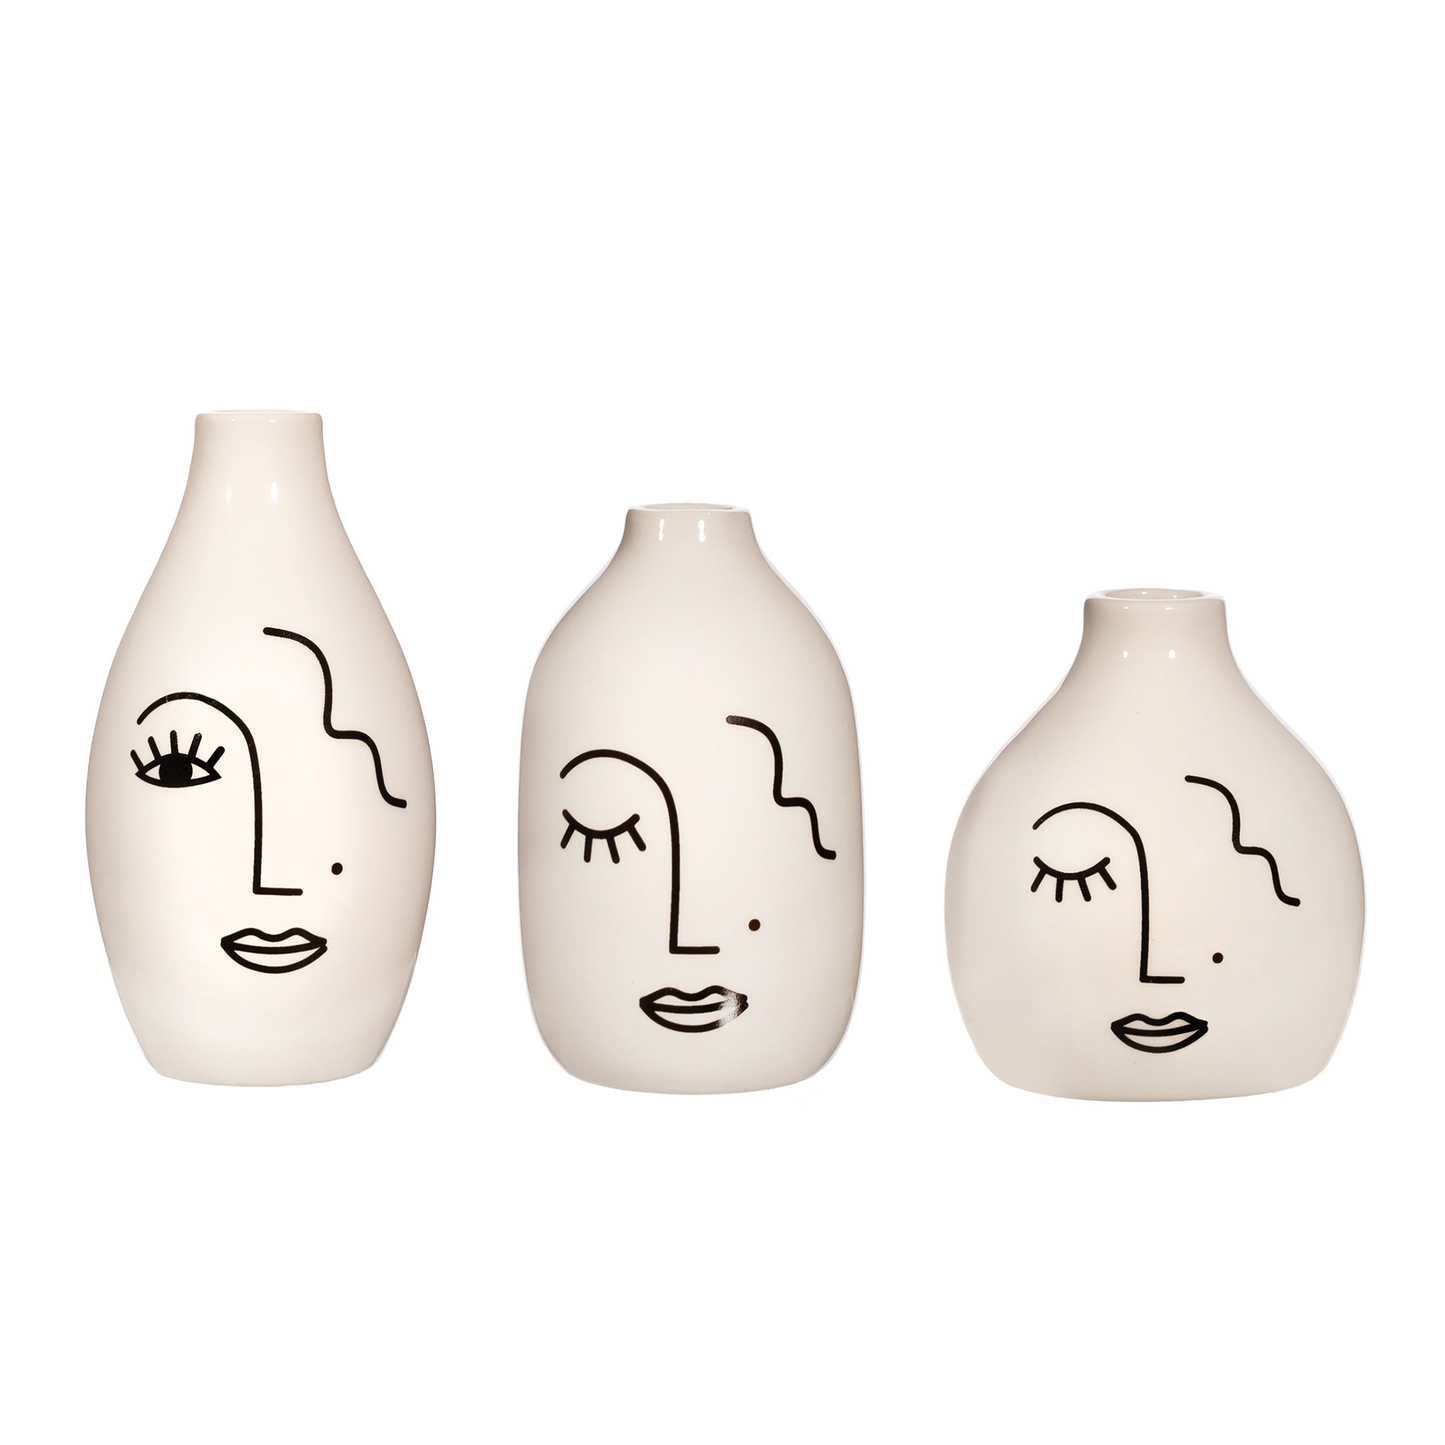 Minimalist Abstract Face Vases - Set of 3